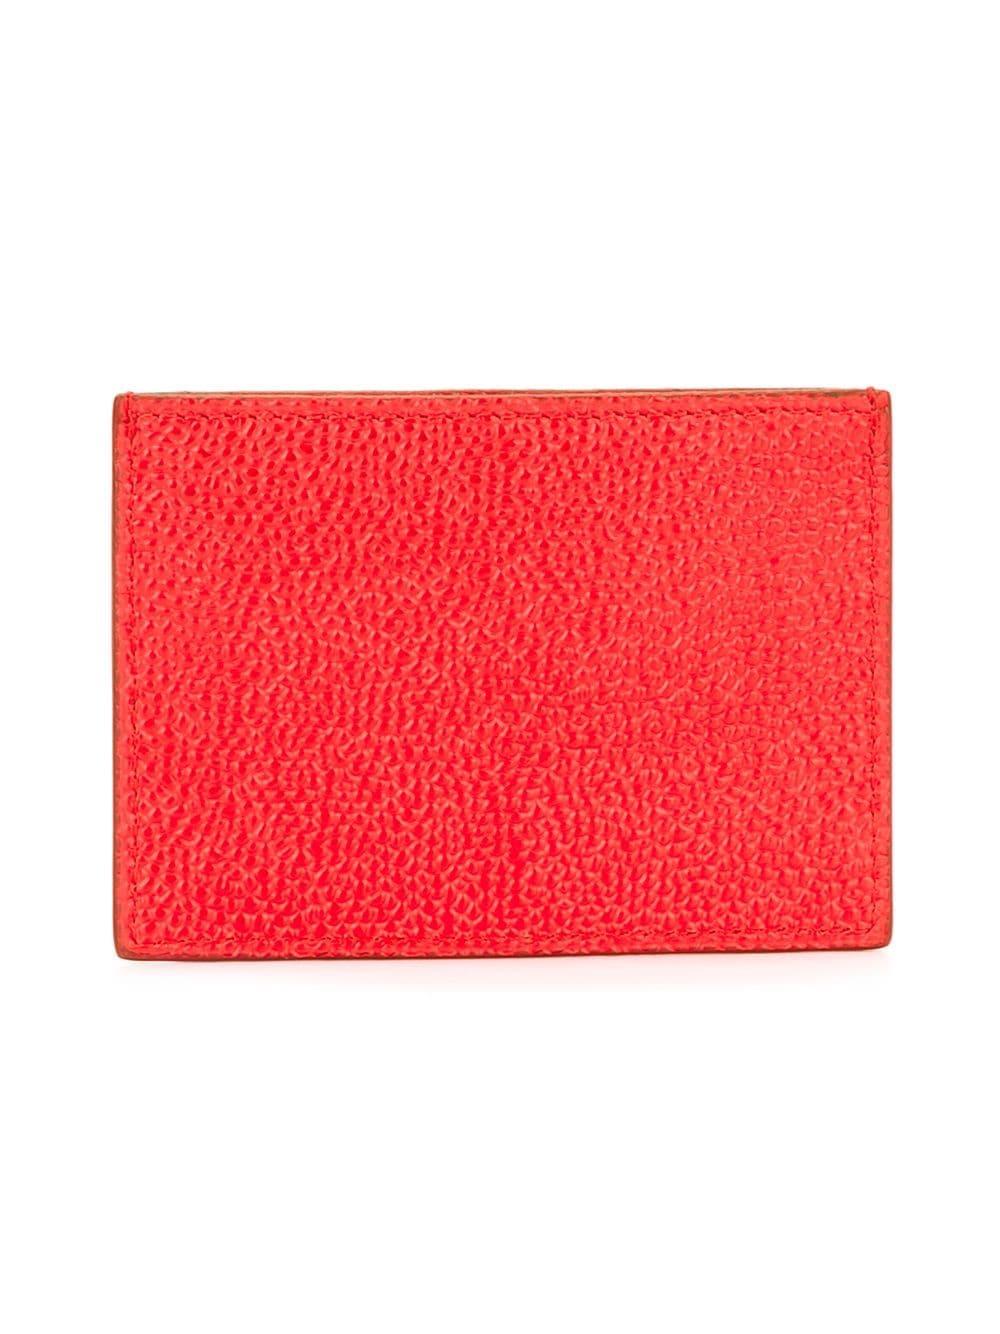 Thom Browne classic cardholder - Red